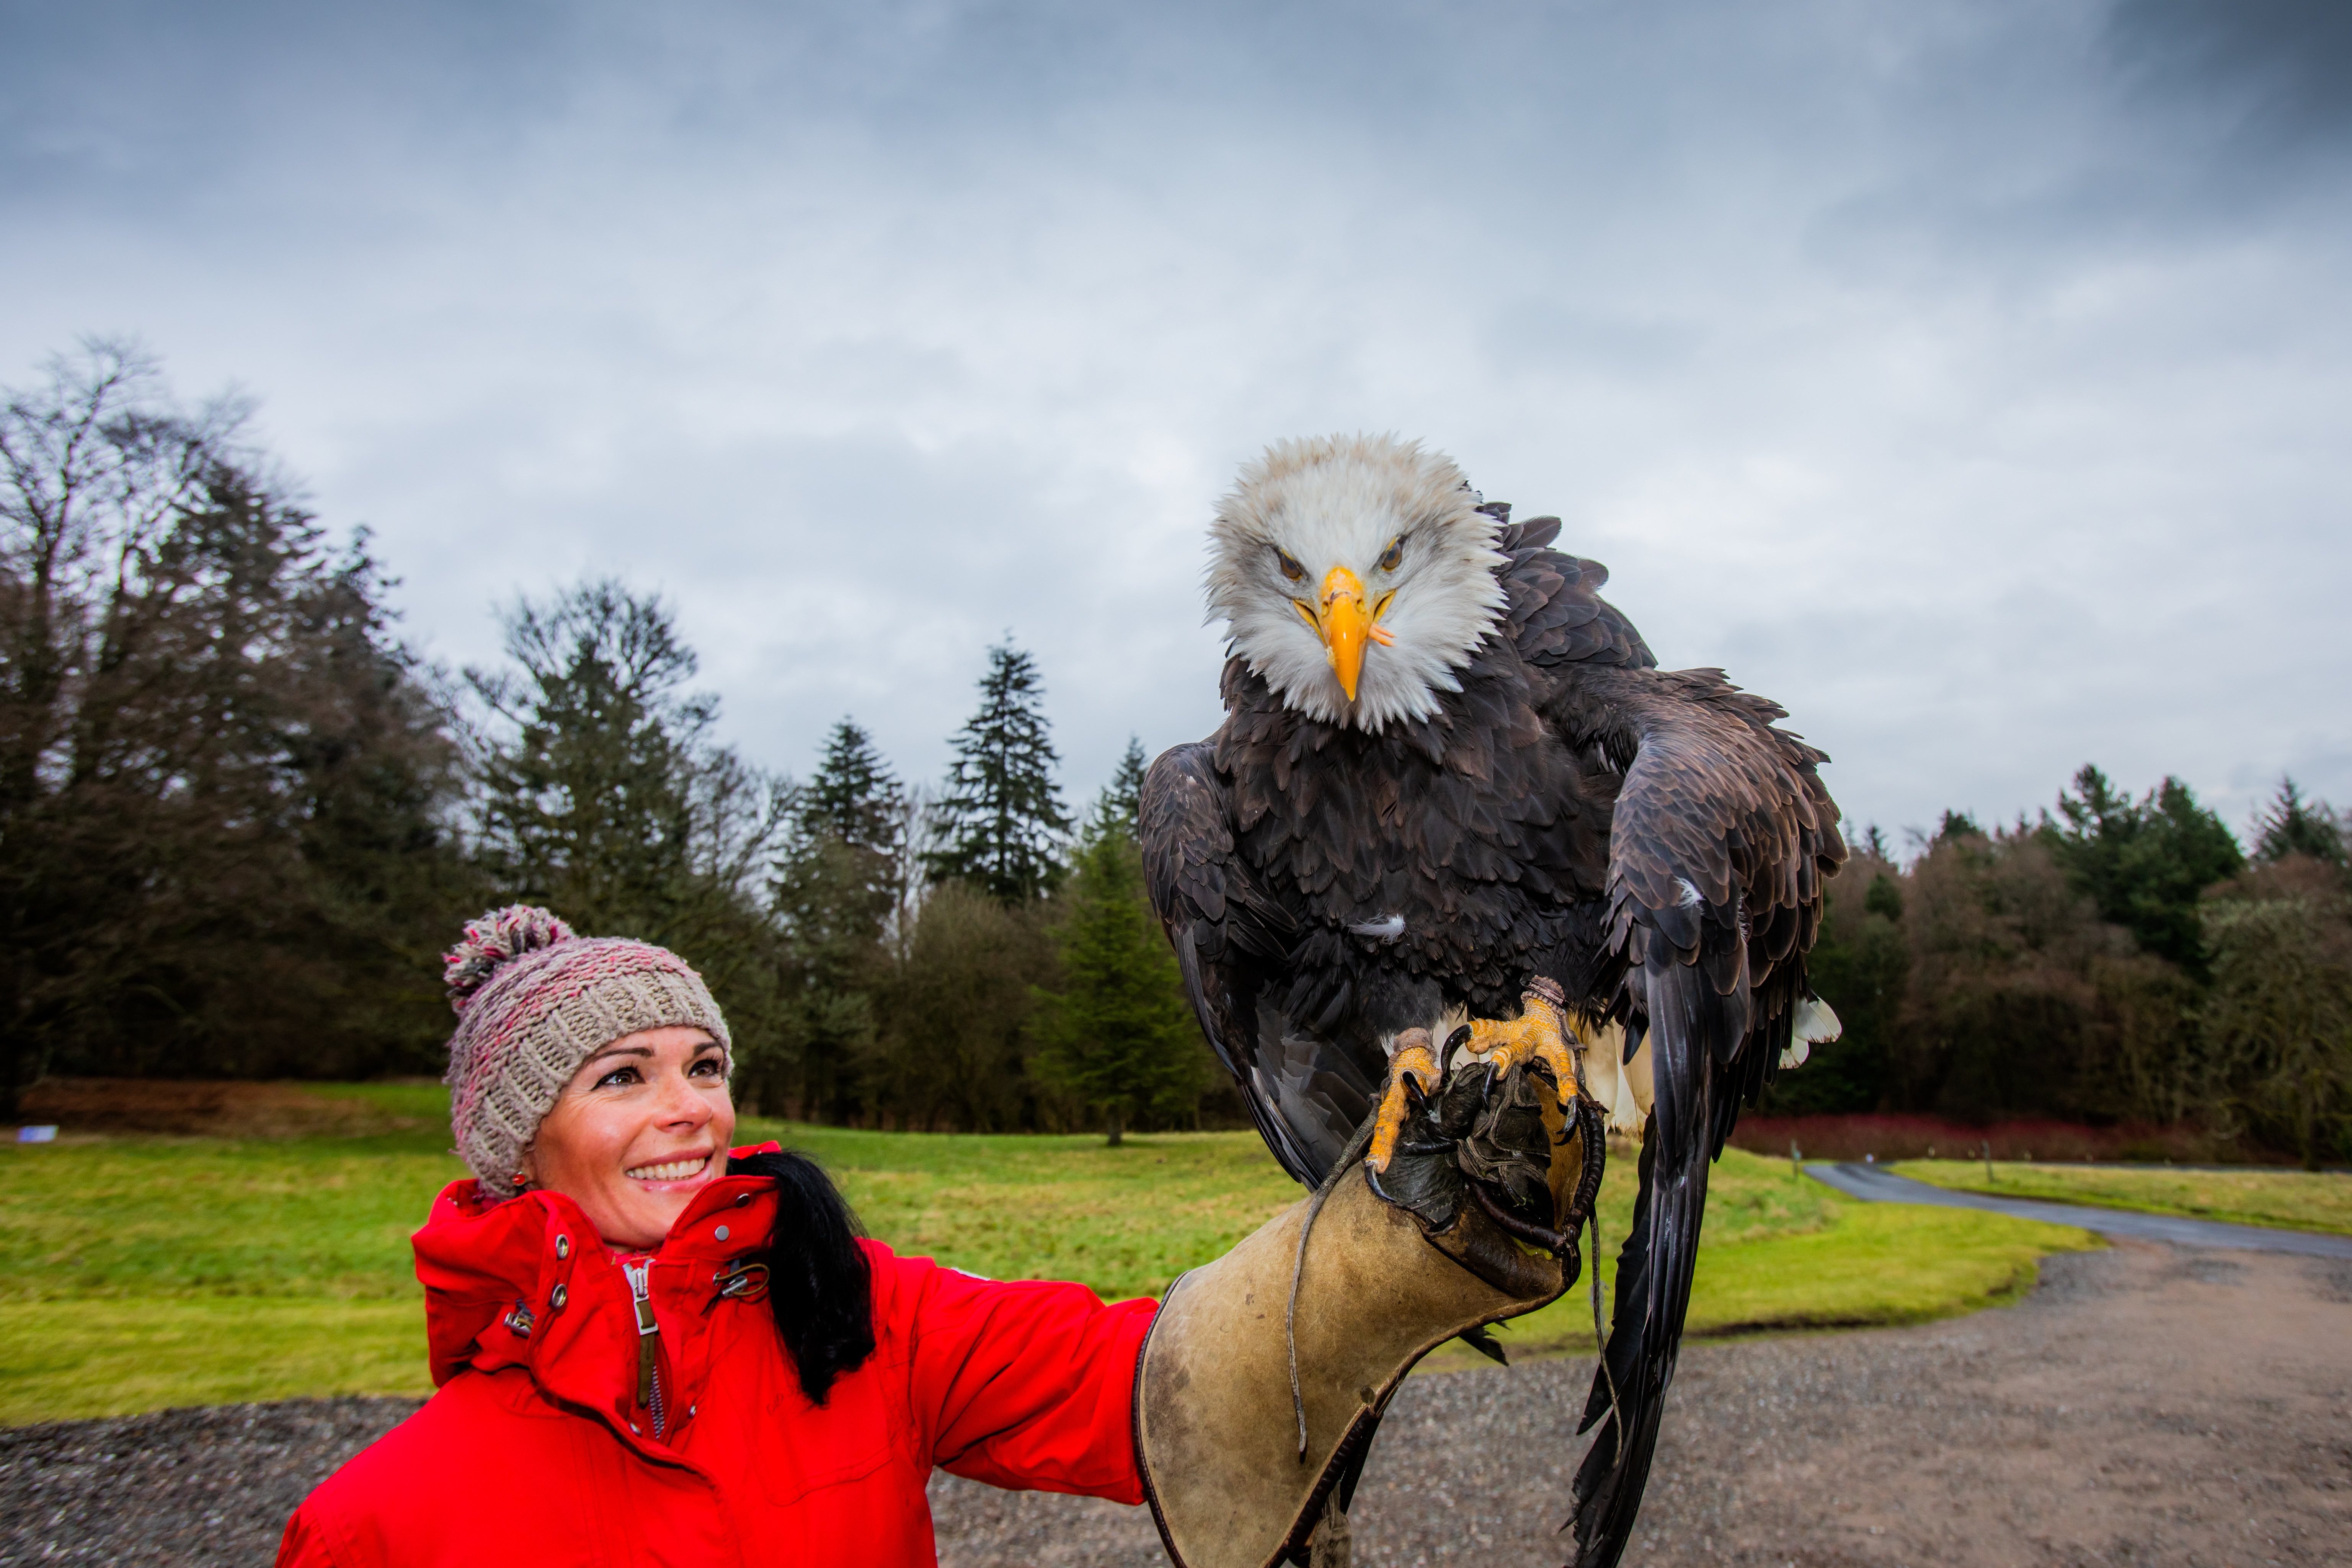 Gayle handles Pilgrim, a scary-looking bald eagle!